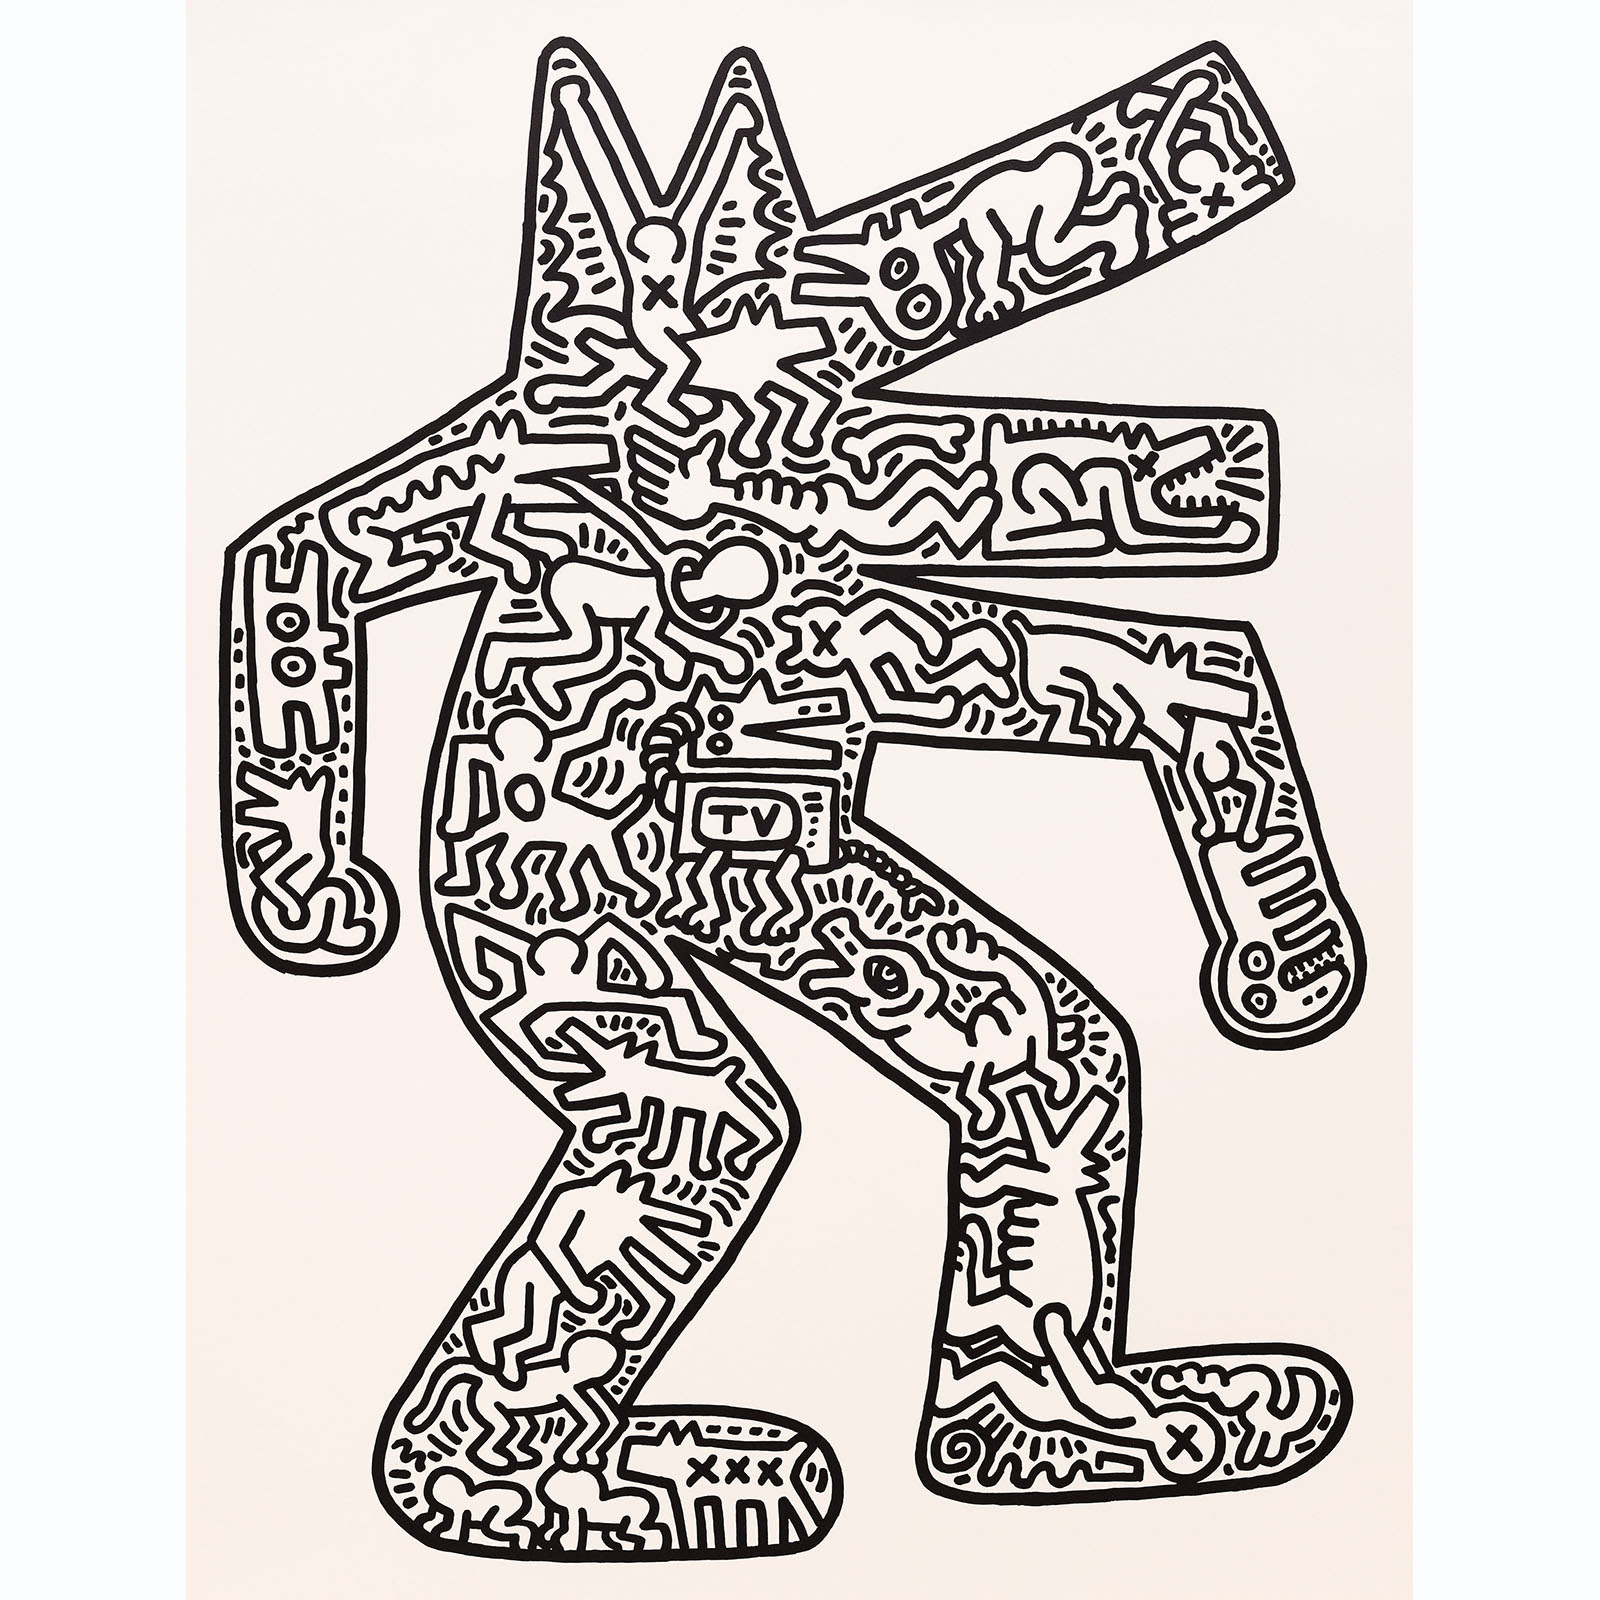 Keith Haring · Dog (1985) · lithograph · 45 x 35 1/2 inches · edition of 40. © The Keith Haring Foundation.